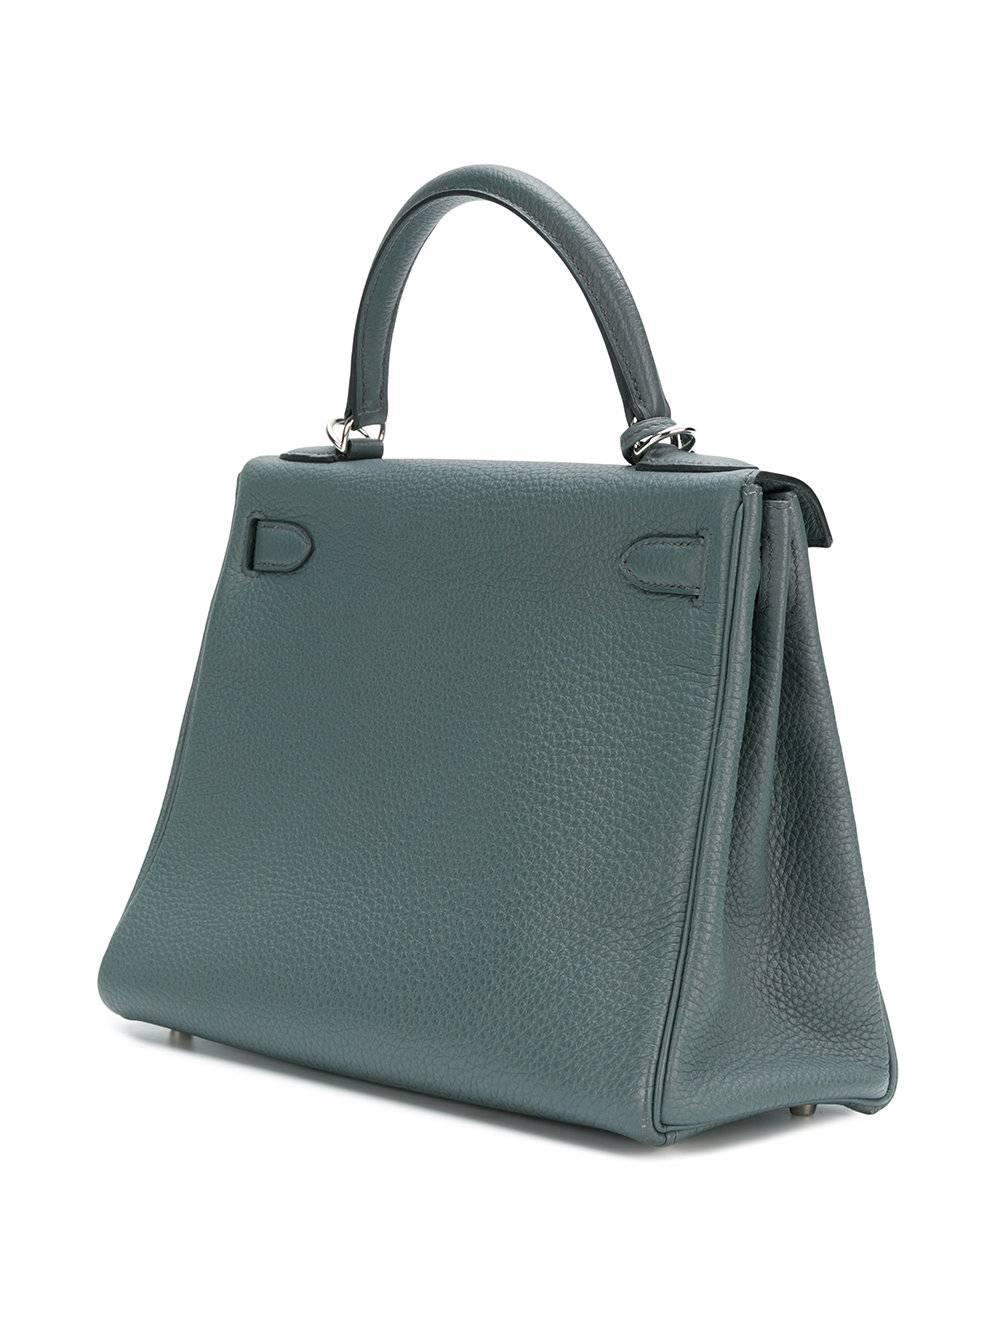 This exquisite Hermes 25cm Kelly bag is crafted in France from a beautiful togo leather. This fun-size Kelly bag features a round top handle, a foldover top with the iconic Hermès twist-lock closure, an internal zipped pocket, a structured design